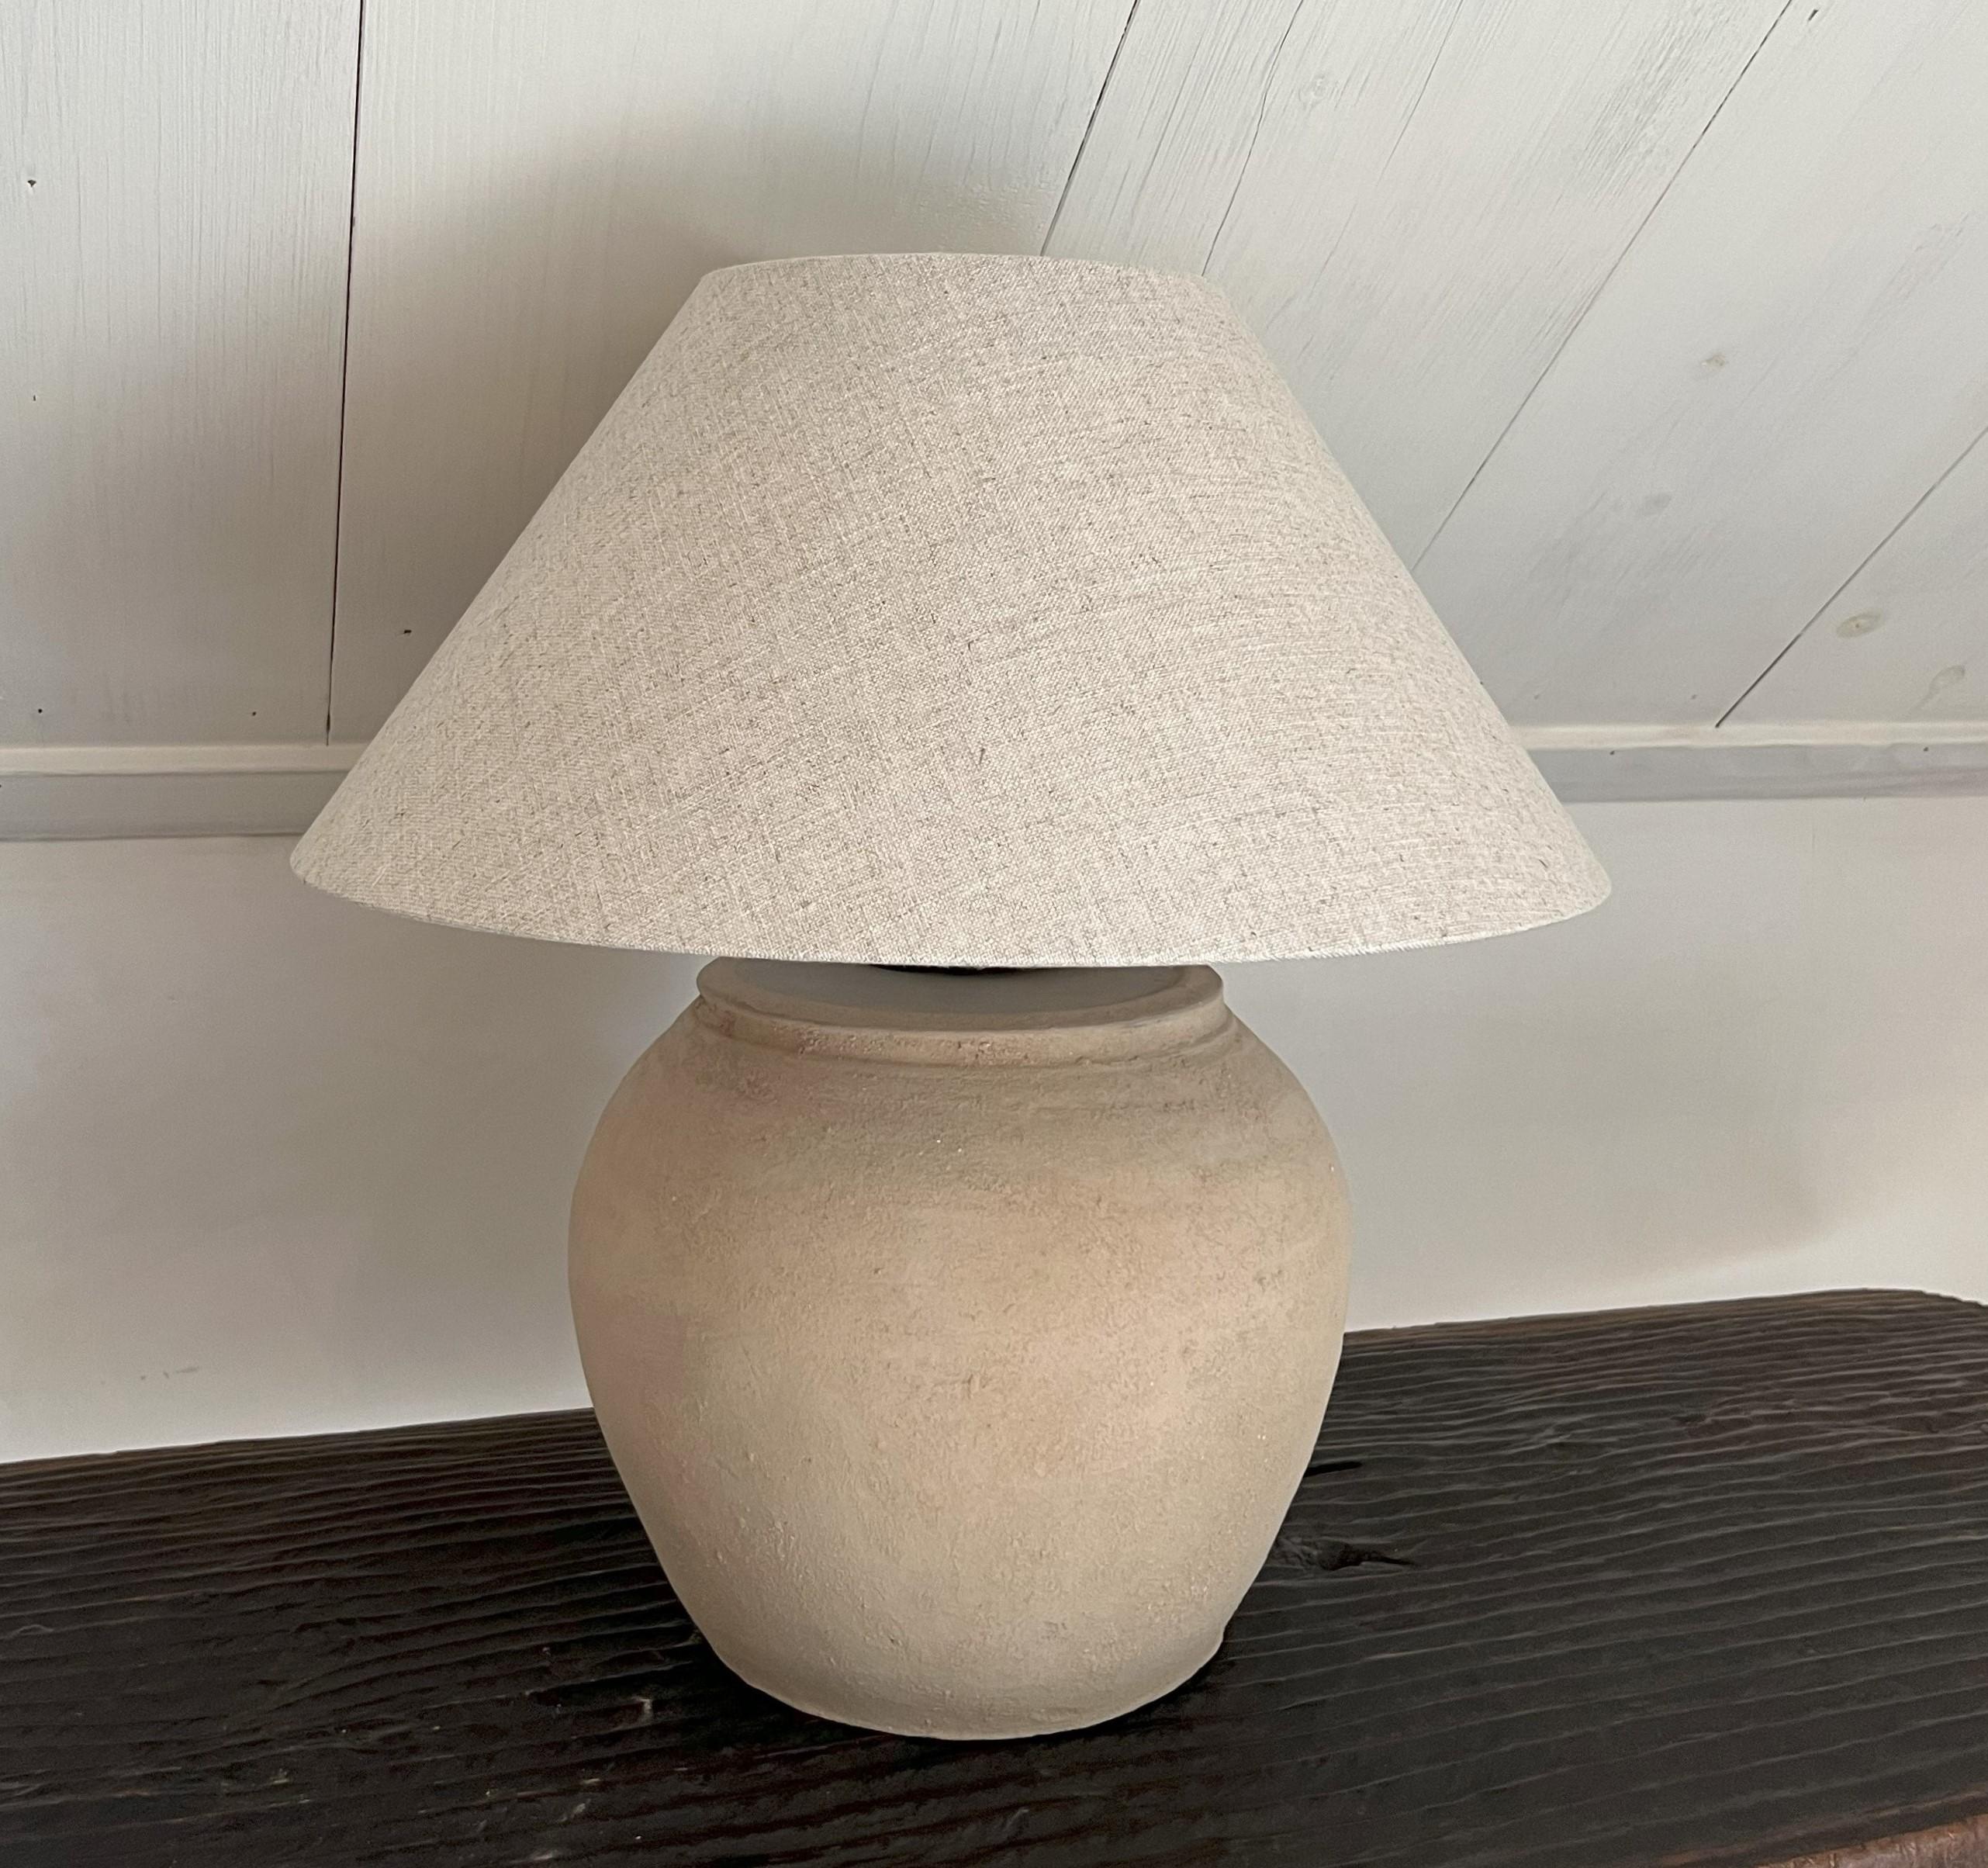 A Chinese Han style vase turned in to a tablelamp. Made from unglazed grey earthenware in a pot shape with subtle sandgrain patina. This vase has a great untouched patina with no cracks or restaurations. 